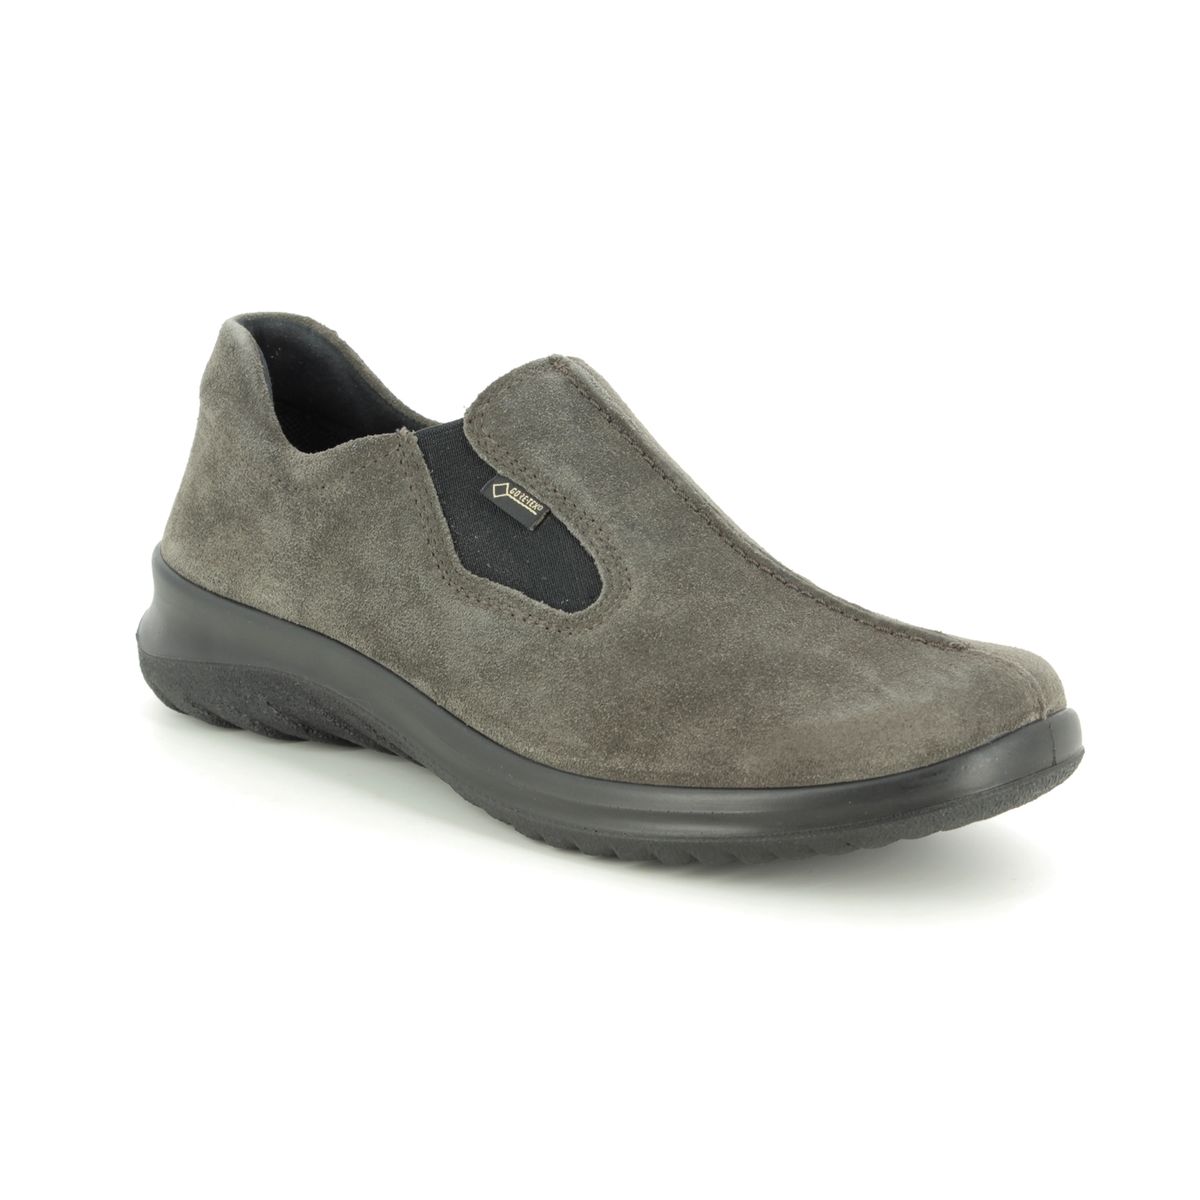 Legero Soft Shoe Gtx Grey Suede Womens Comfort Slip On Shoes 09568-28 In Size 7 In Plain Grey Suede